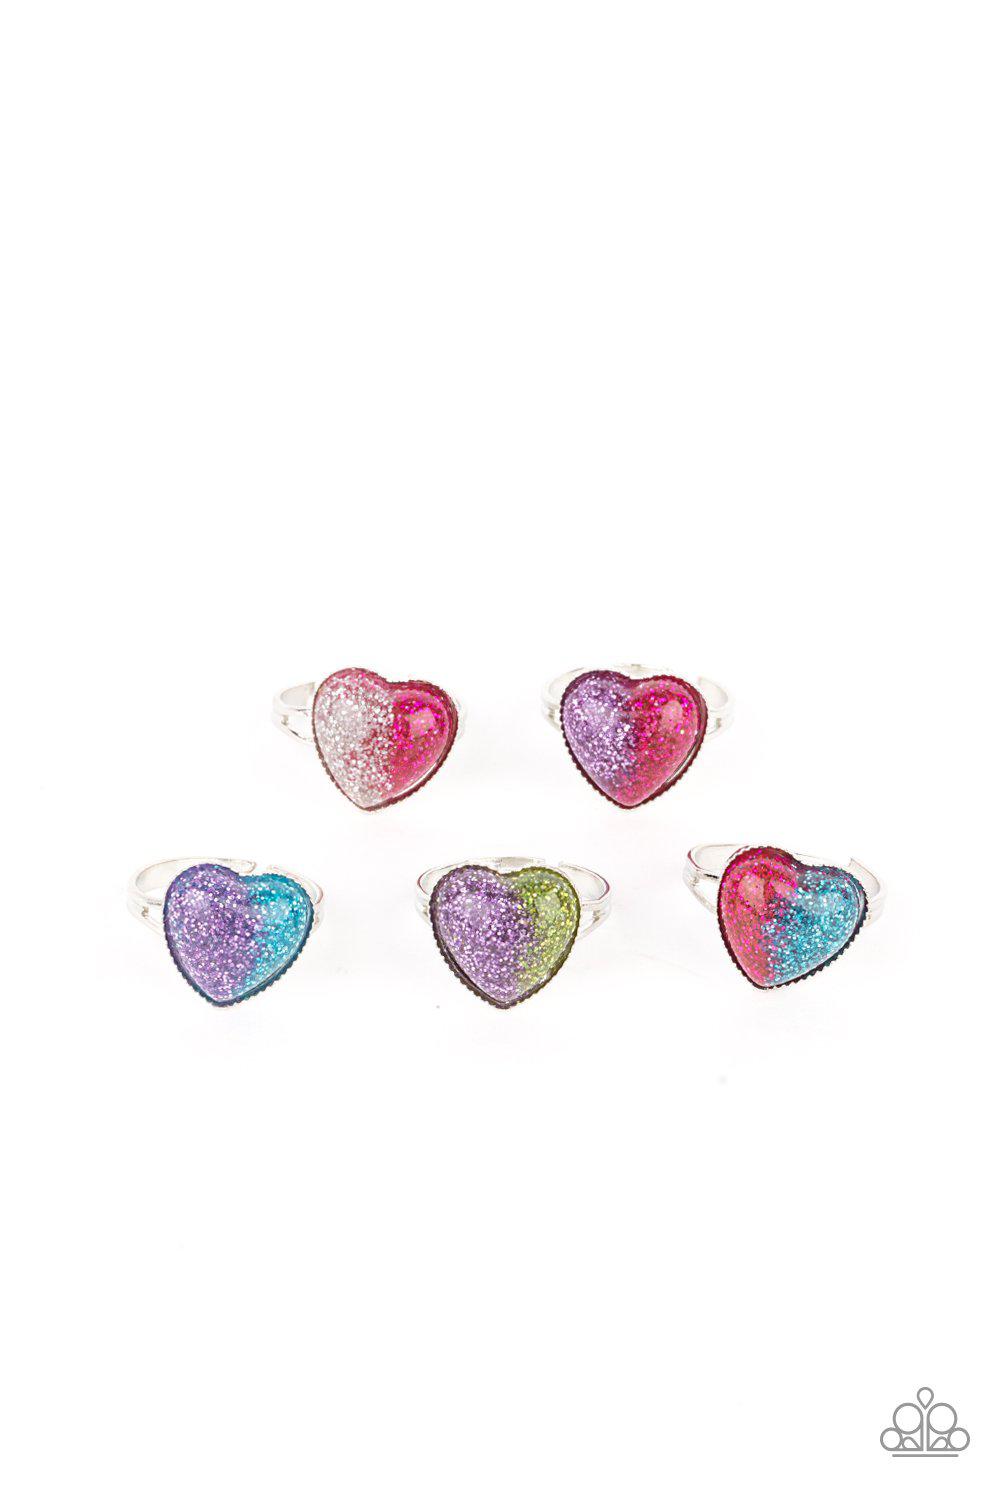 Starlet Shimmer Children's Two-tone Glitter Heart Rings - Paparazzi Accessories (set of 5) - Full set -CarasShop.com - $5 Jewelry by Cara Jewels